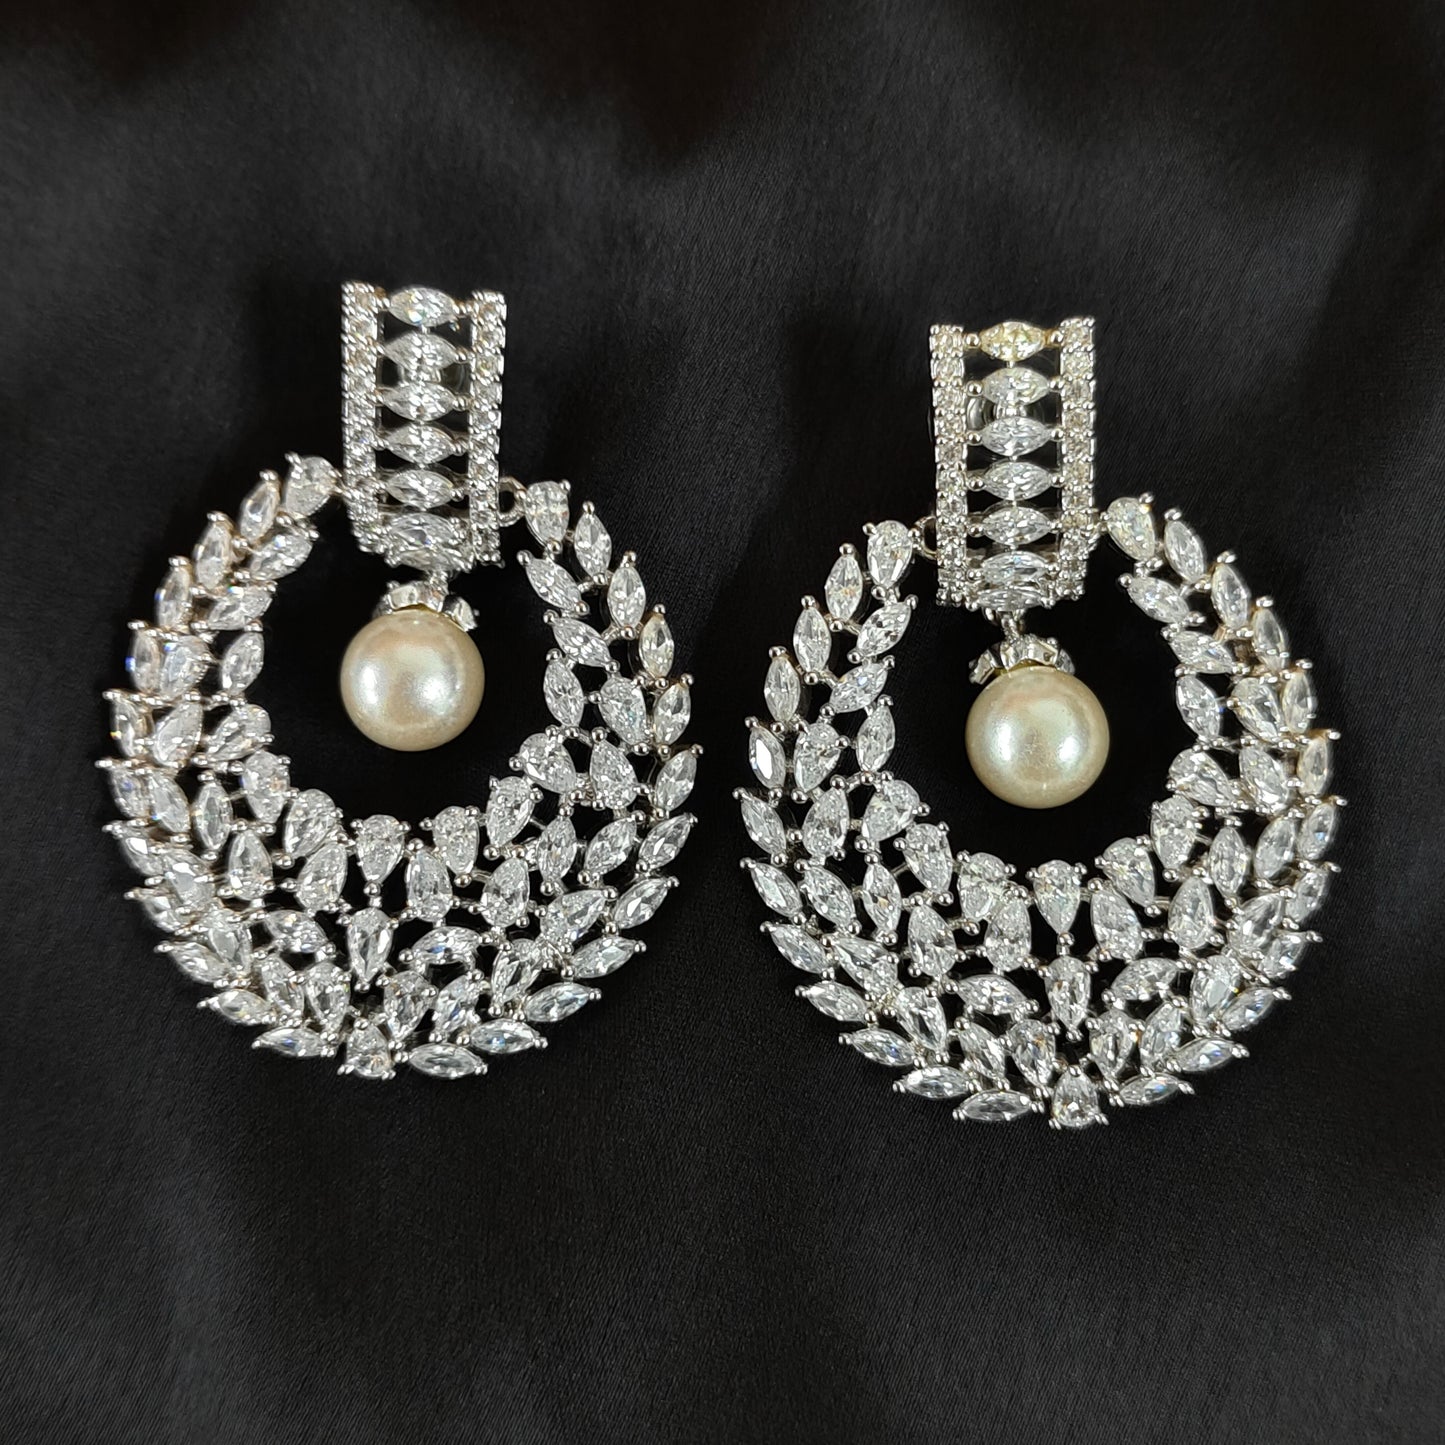 Bdiva Rhodium Plated Cubic Zirconia and Pearl Statement Earrings